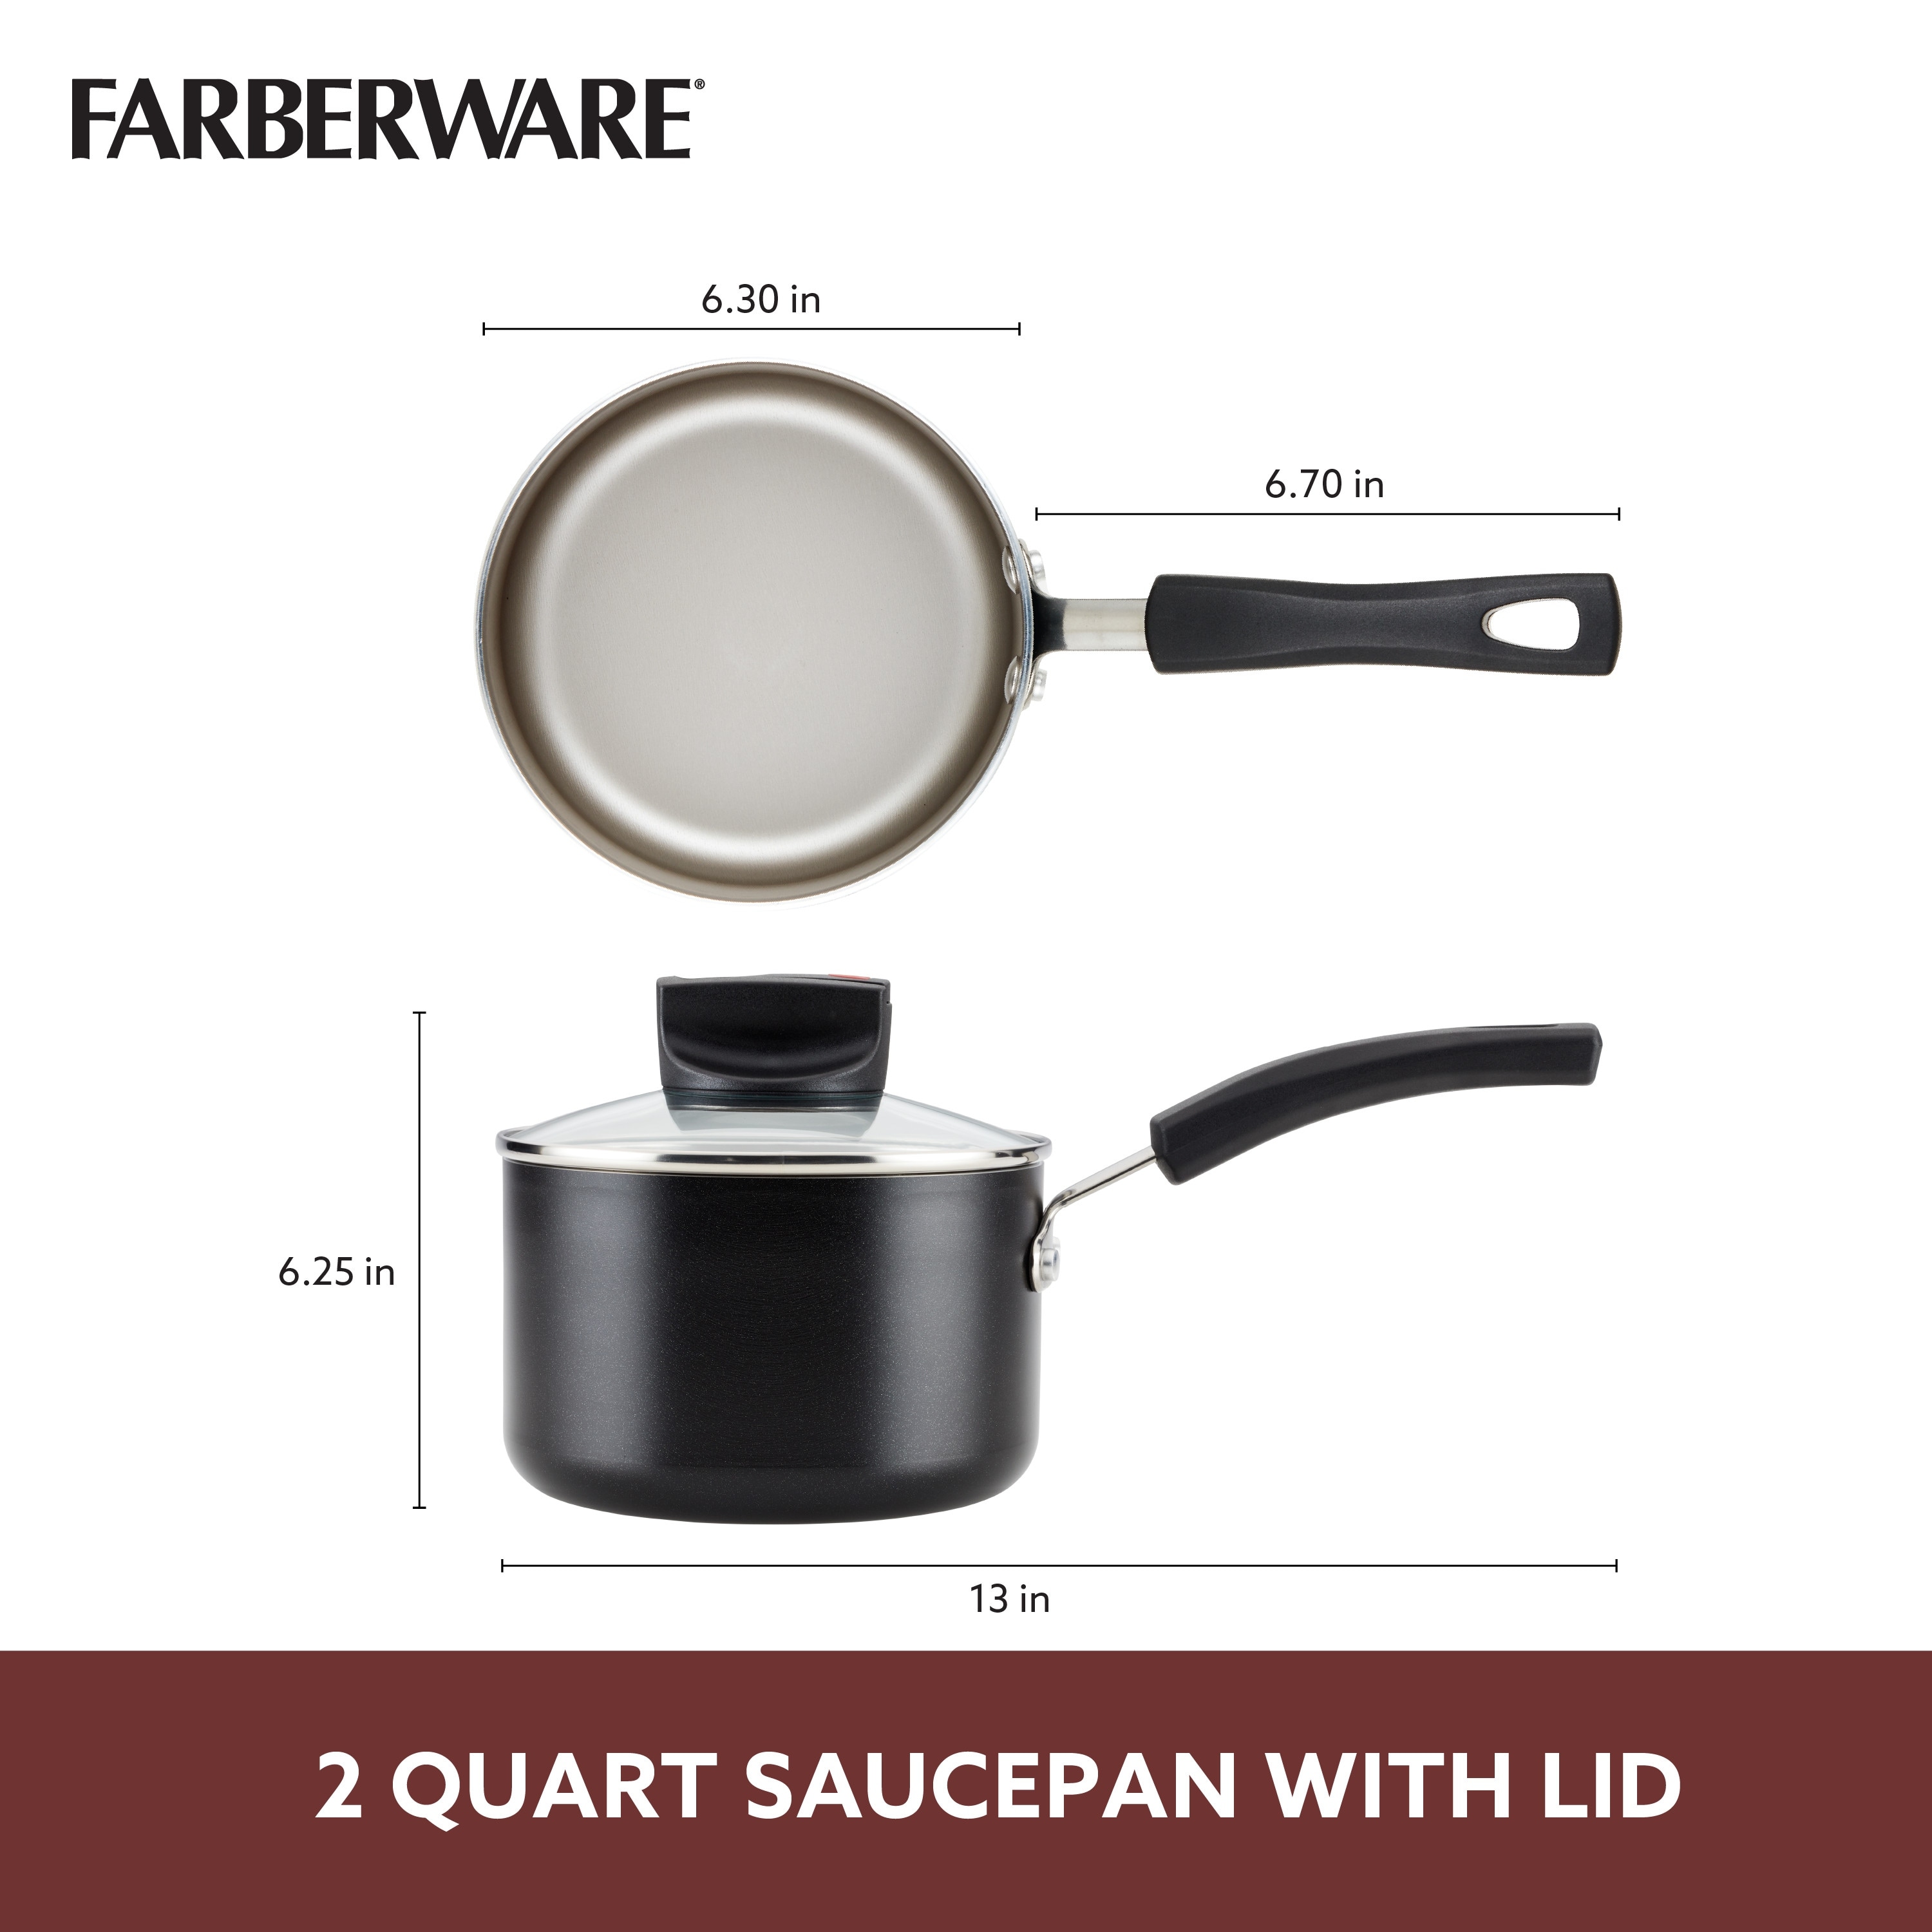 https://ak1.ostkcdn.com/images/products/is/images/direct/f9b738201a08dfbf8a657efd4bf616ac8ccad310/Farberware-Smart-Control-Aluminum-Nonstick-Sauce-Pan-with-Lid%2C-2-Quart.jpg